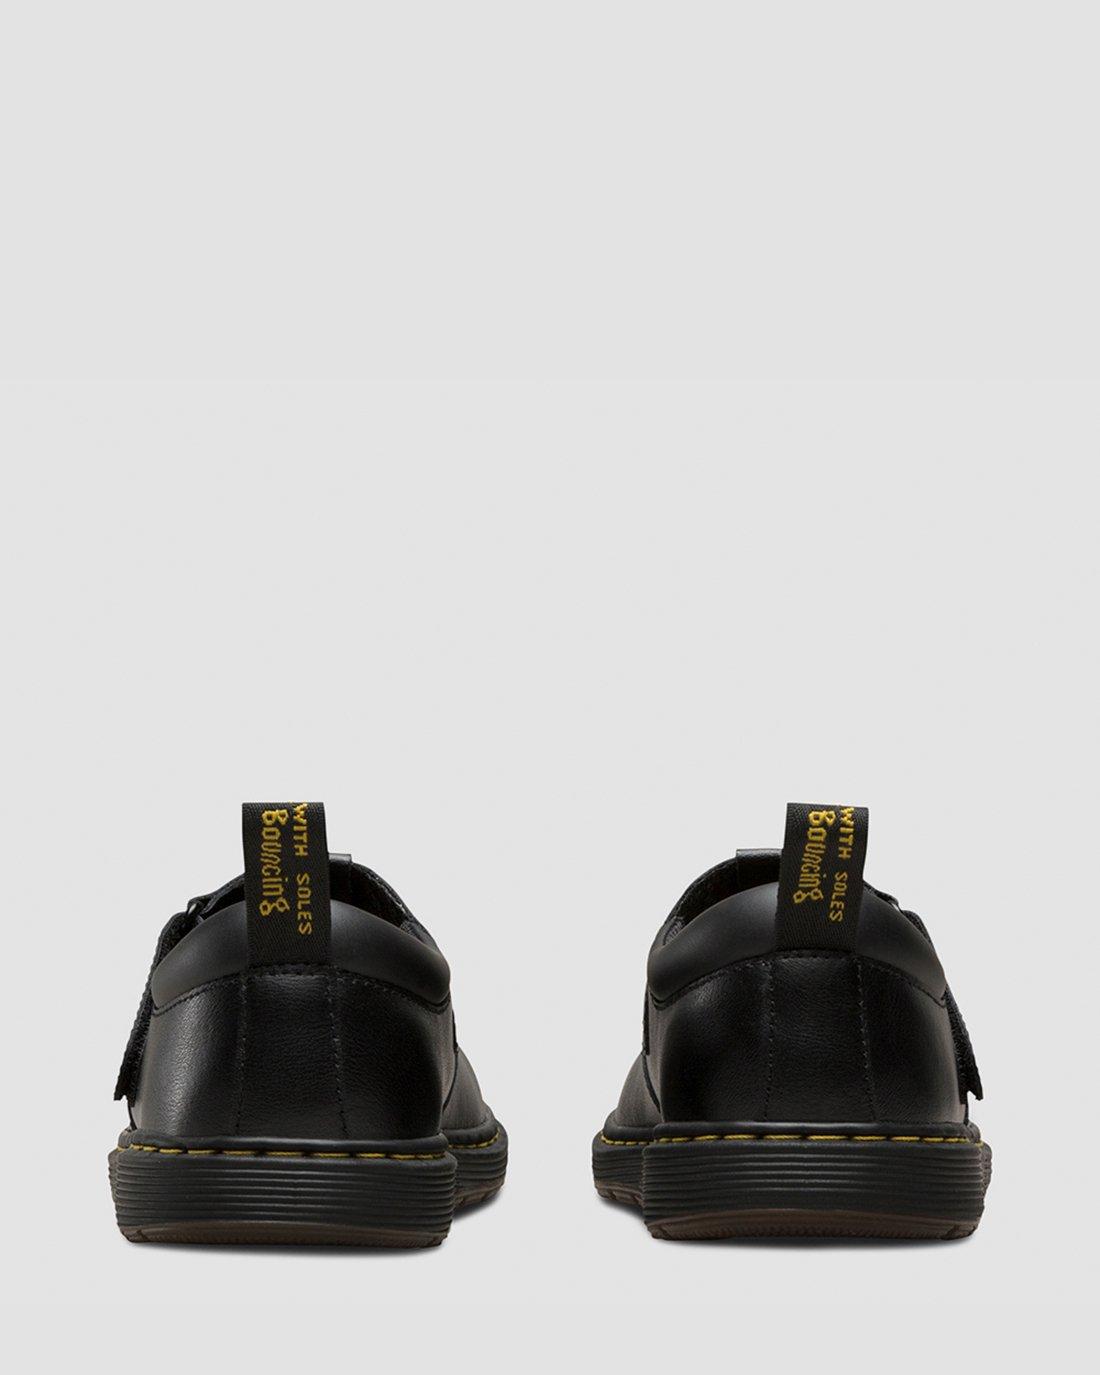 dr martens dulice youth